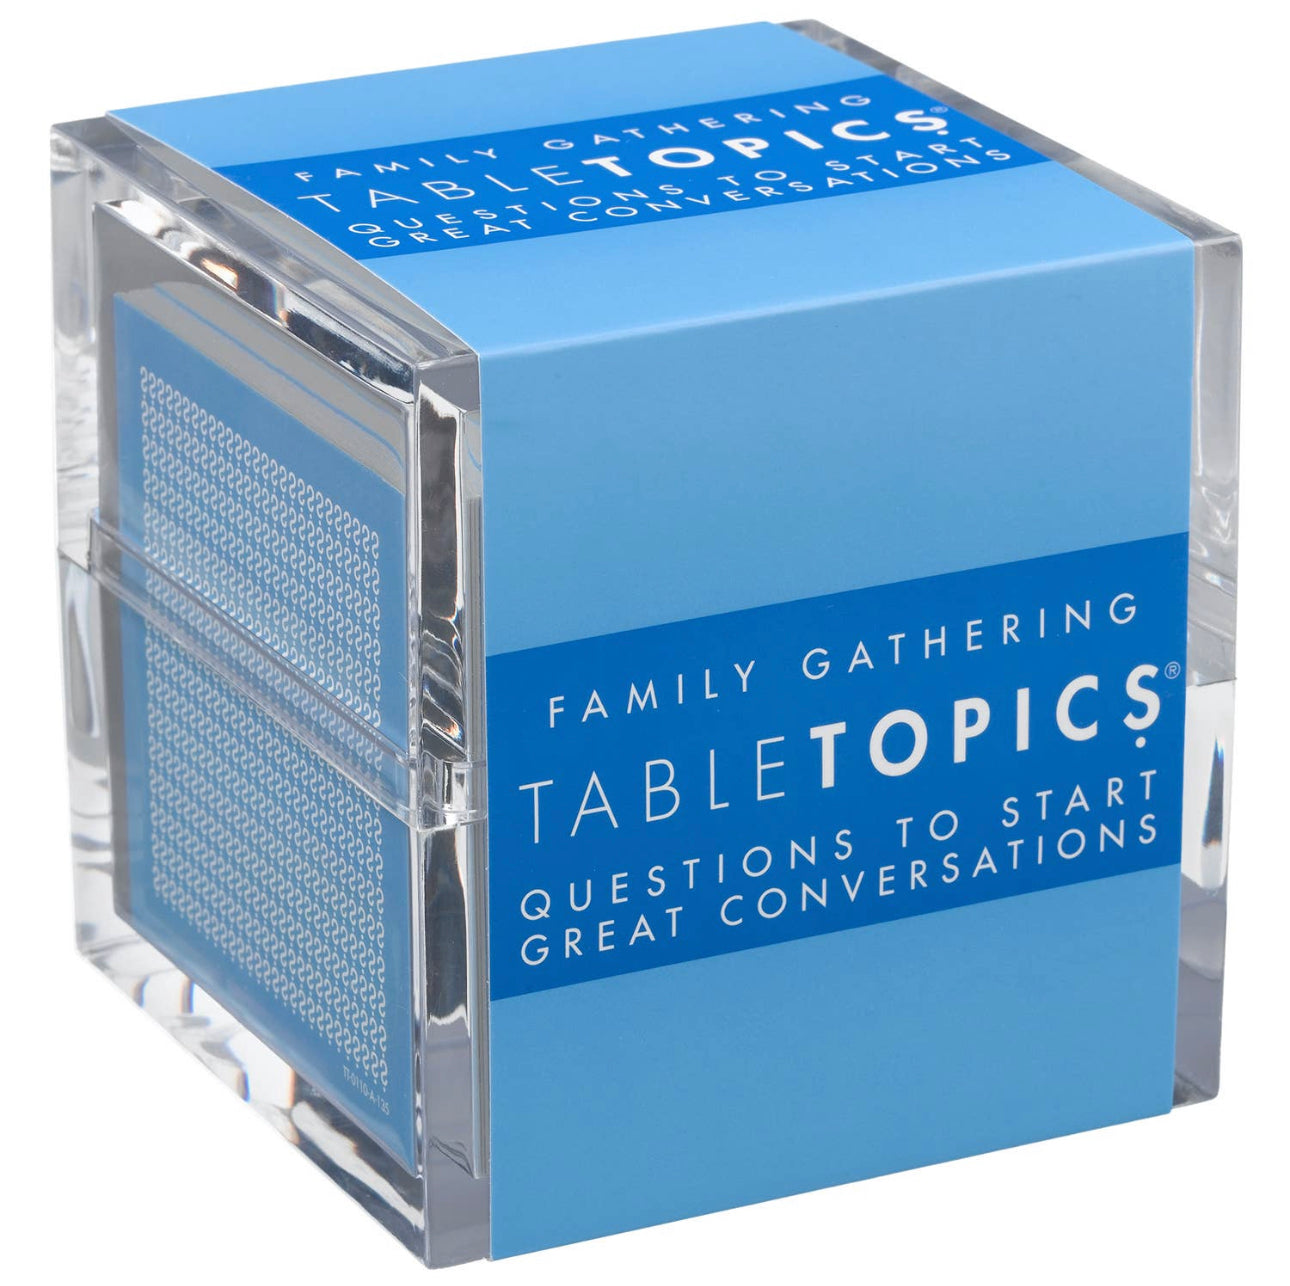 FAMILY GATHERING TABLE TOPICS GAME